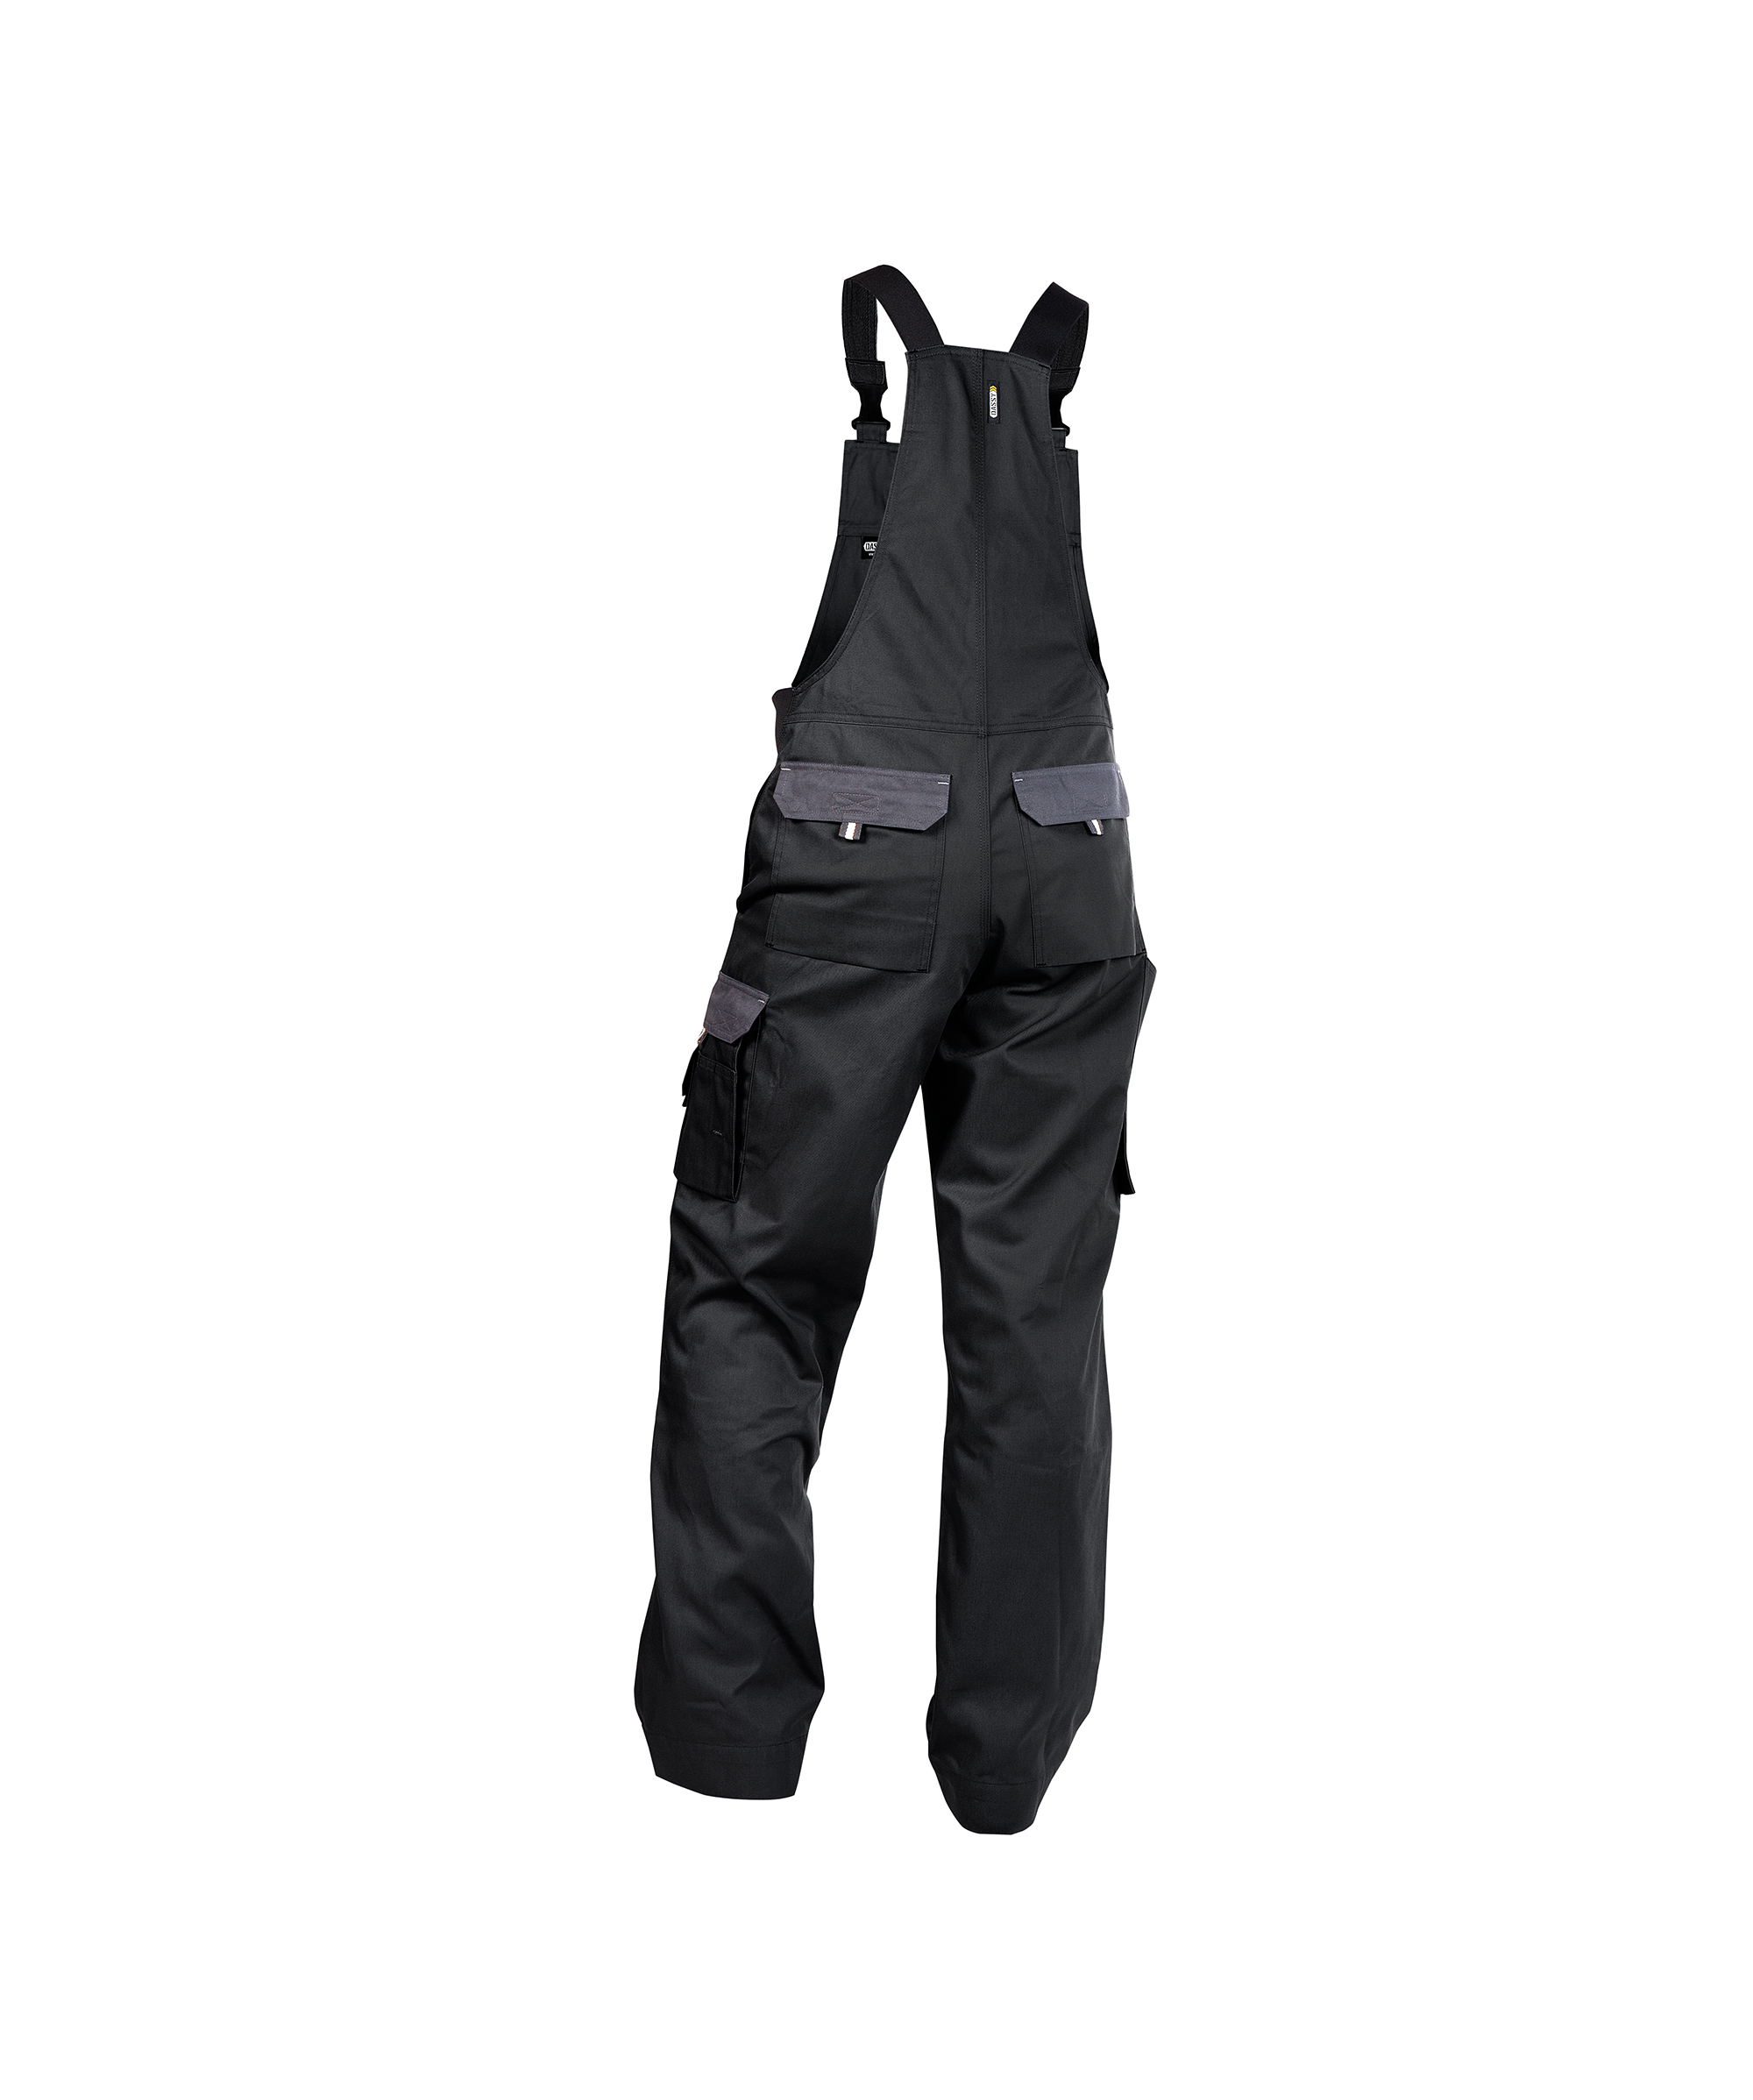 calais_two-tone-brace-overall_black-cement-grey_back.jpg